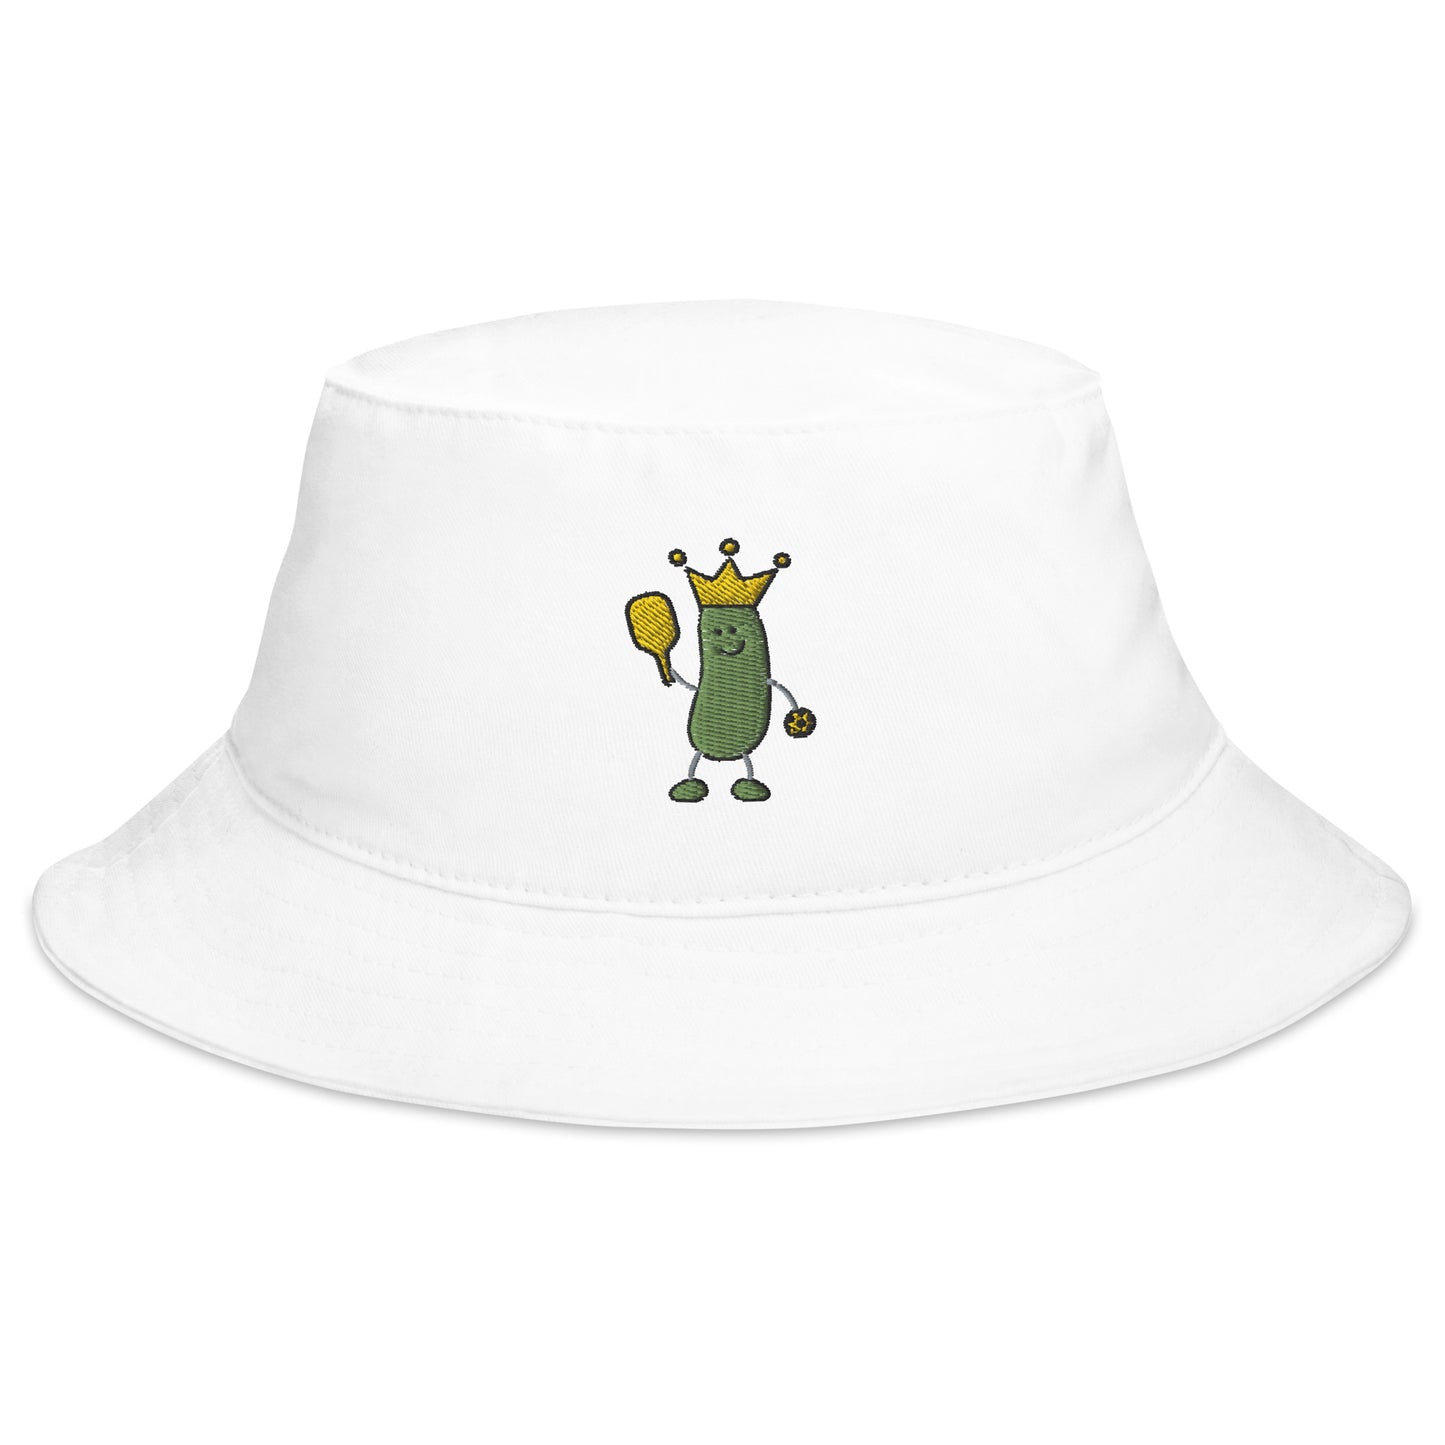 King of the Court- Bucket Hat